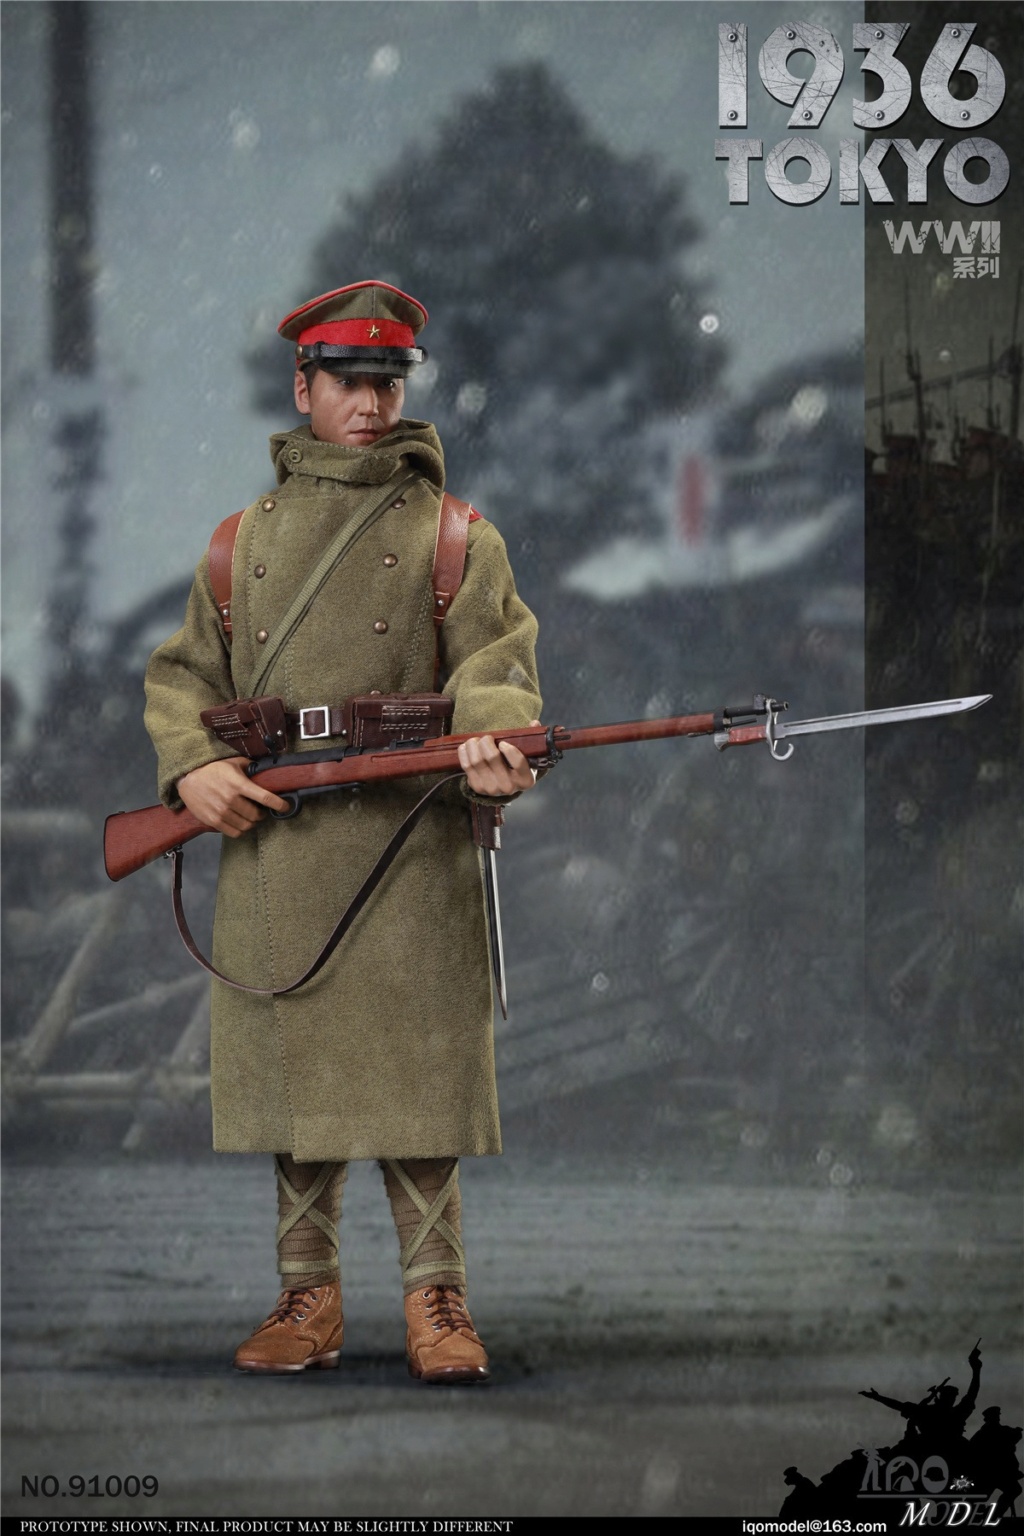 NEW PRODUCT: IQO Model: 1/6 WWII Series 1936 Tokyo (NO.91009) 15463613